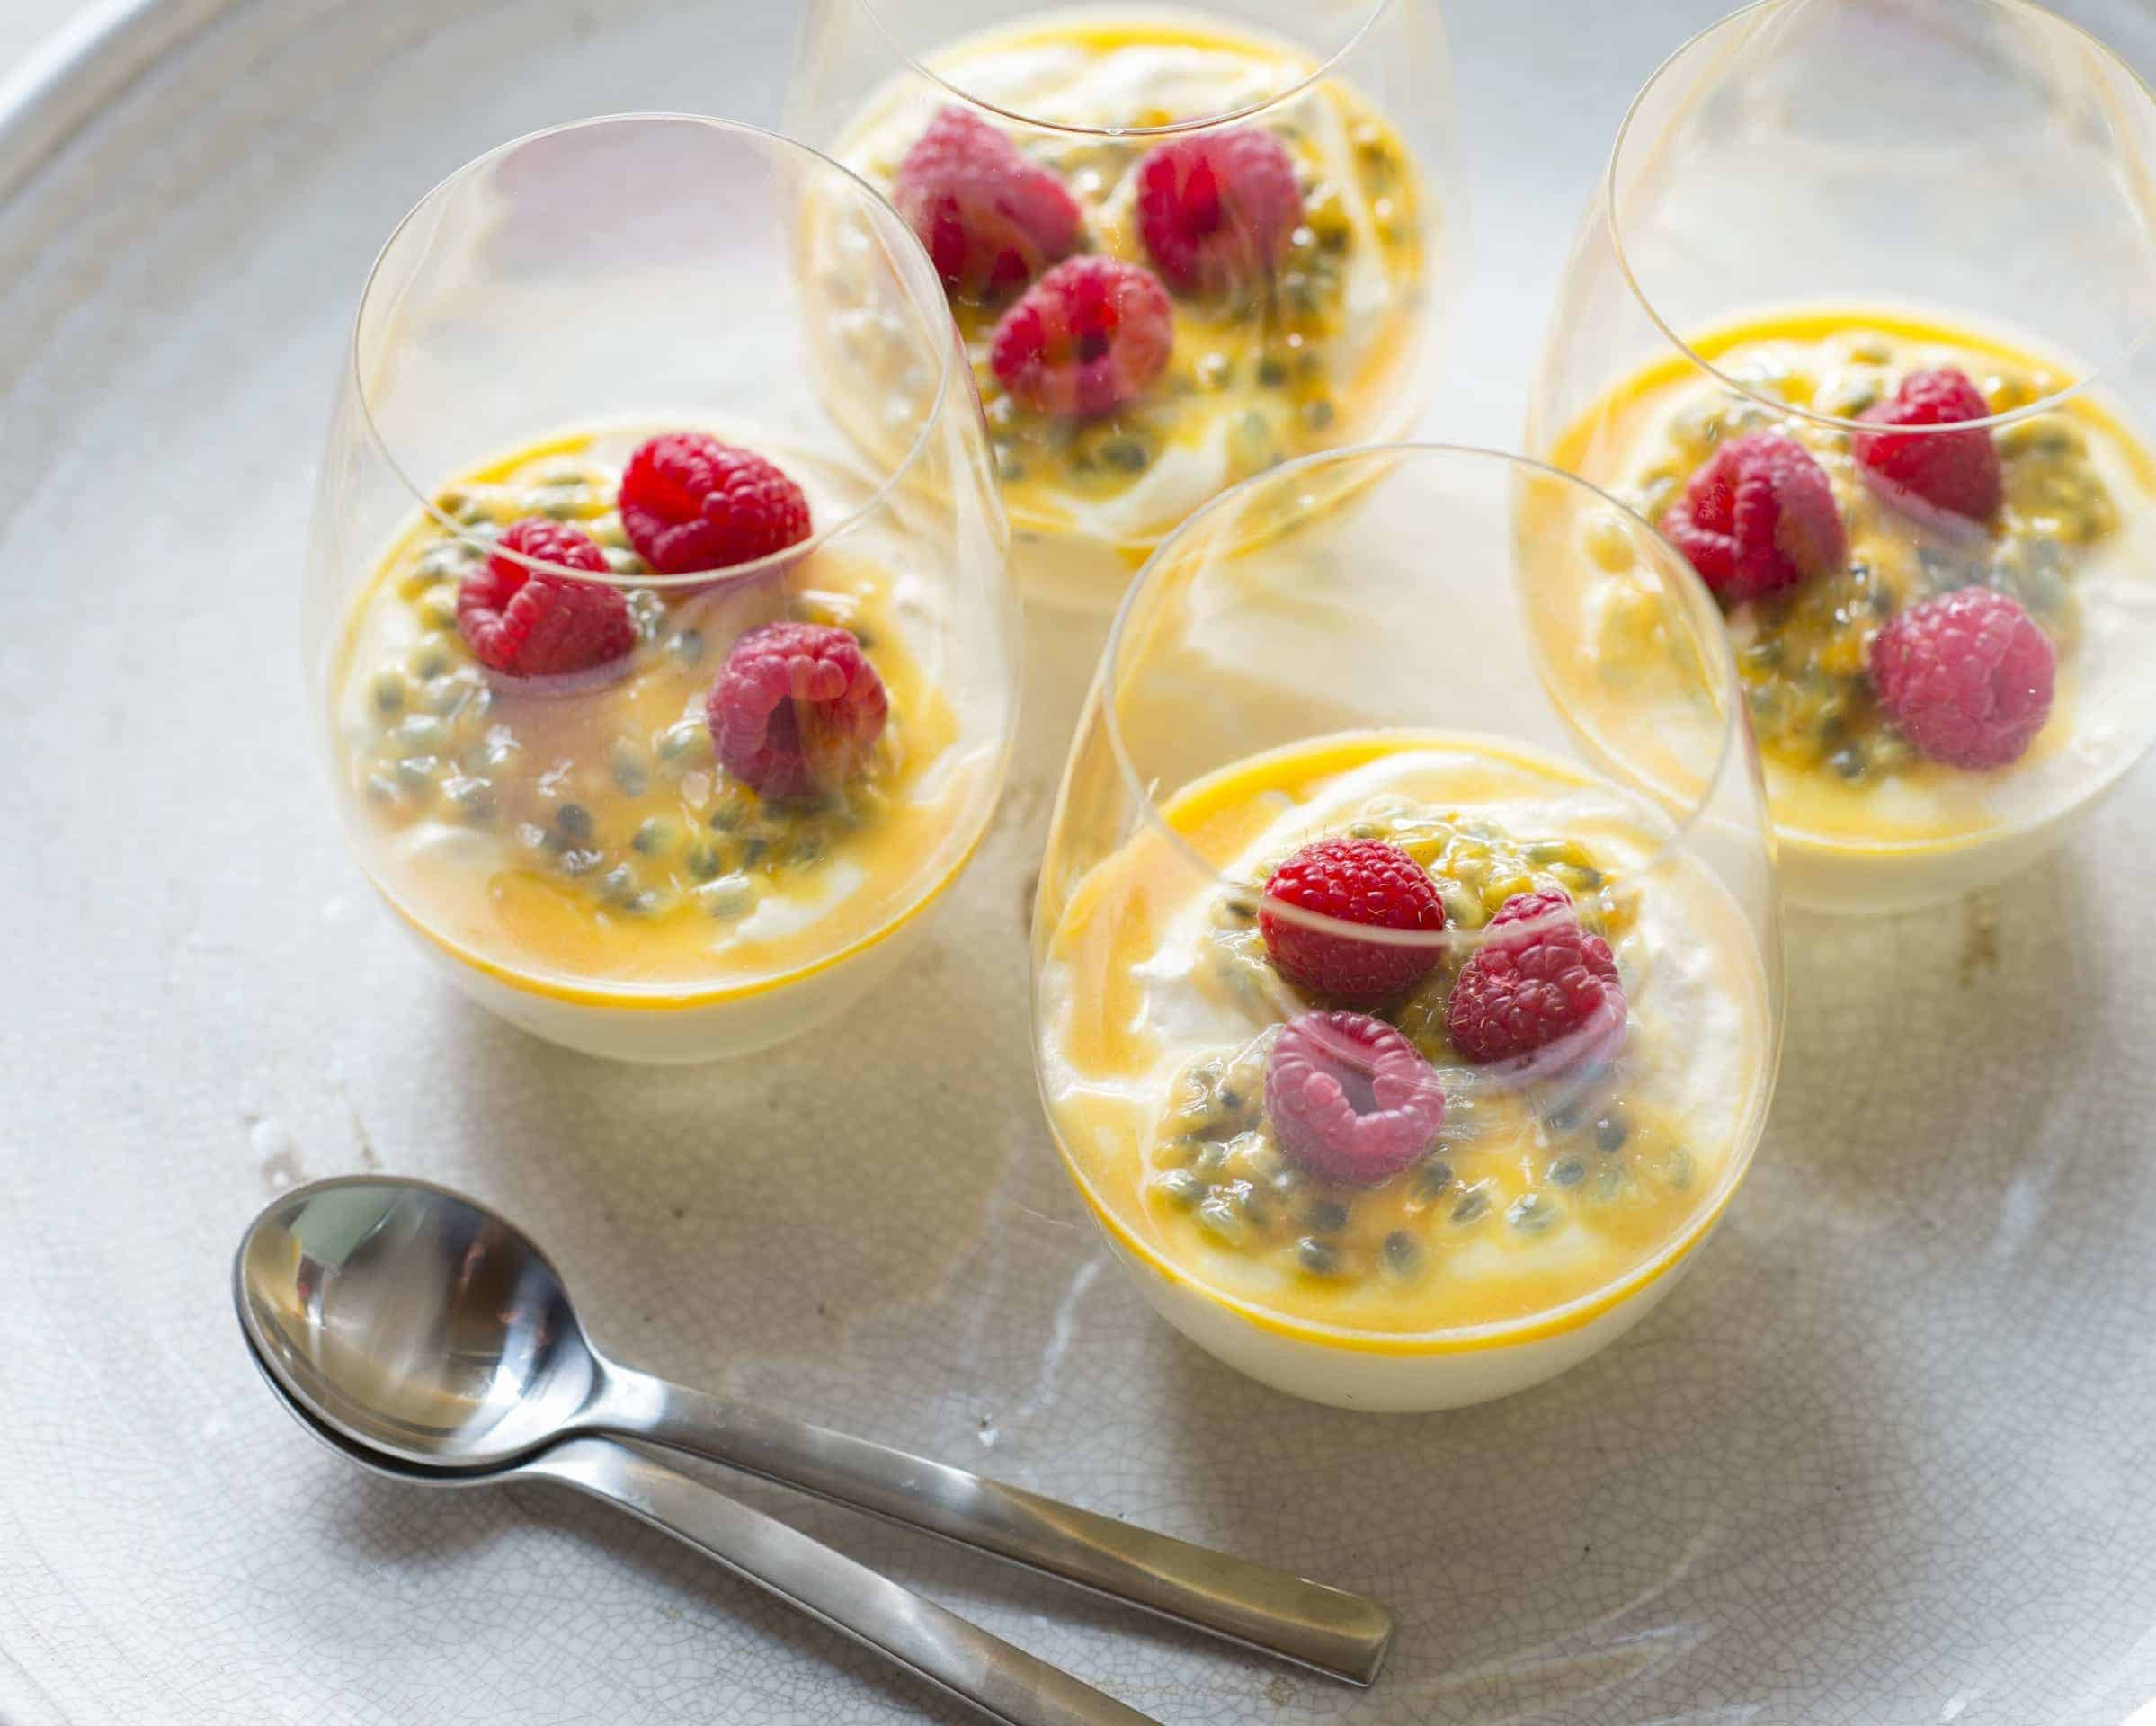 Passion Fruit Desserts Recipes
 White Chocolate and Passionfruit Mousse Monday Morning